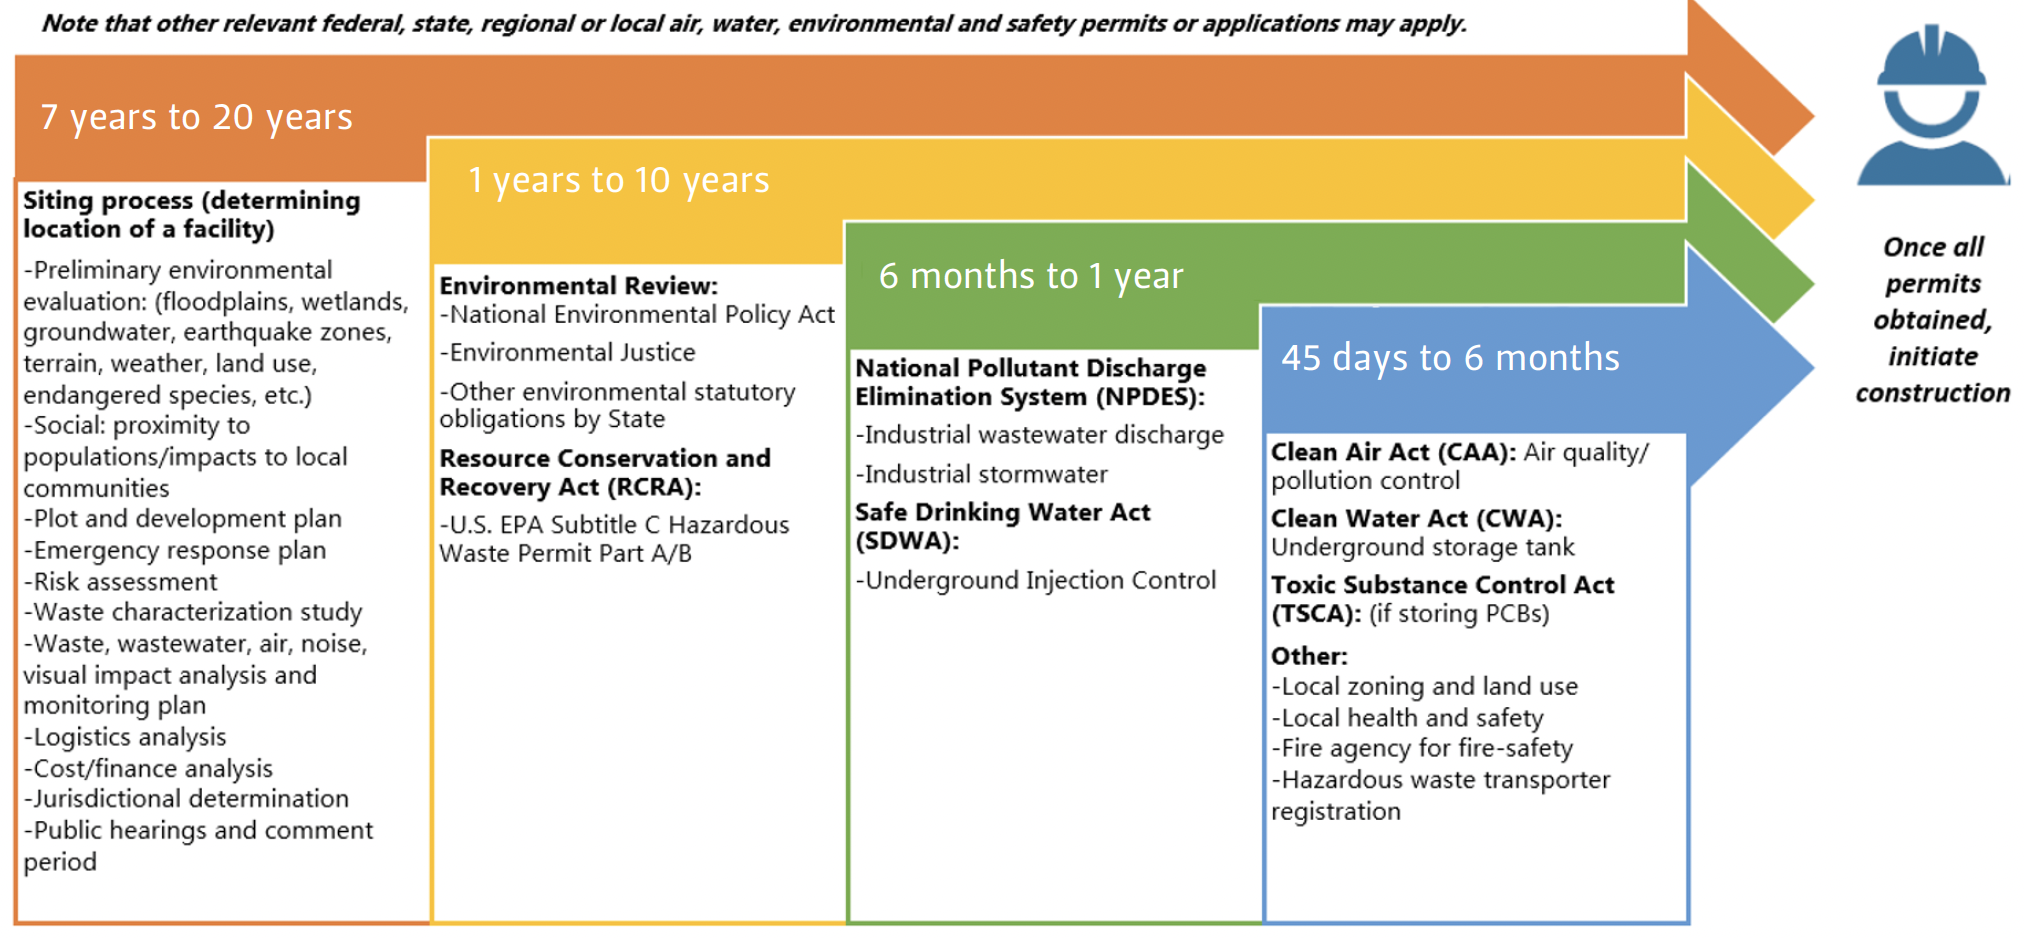 This timeline shows that obtaining permits related to hazardous waste can span decades.